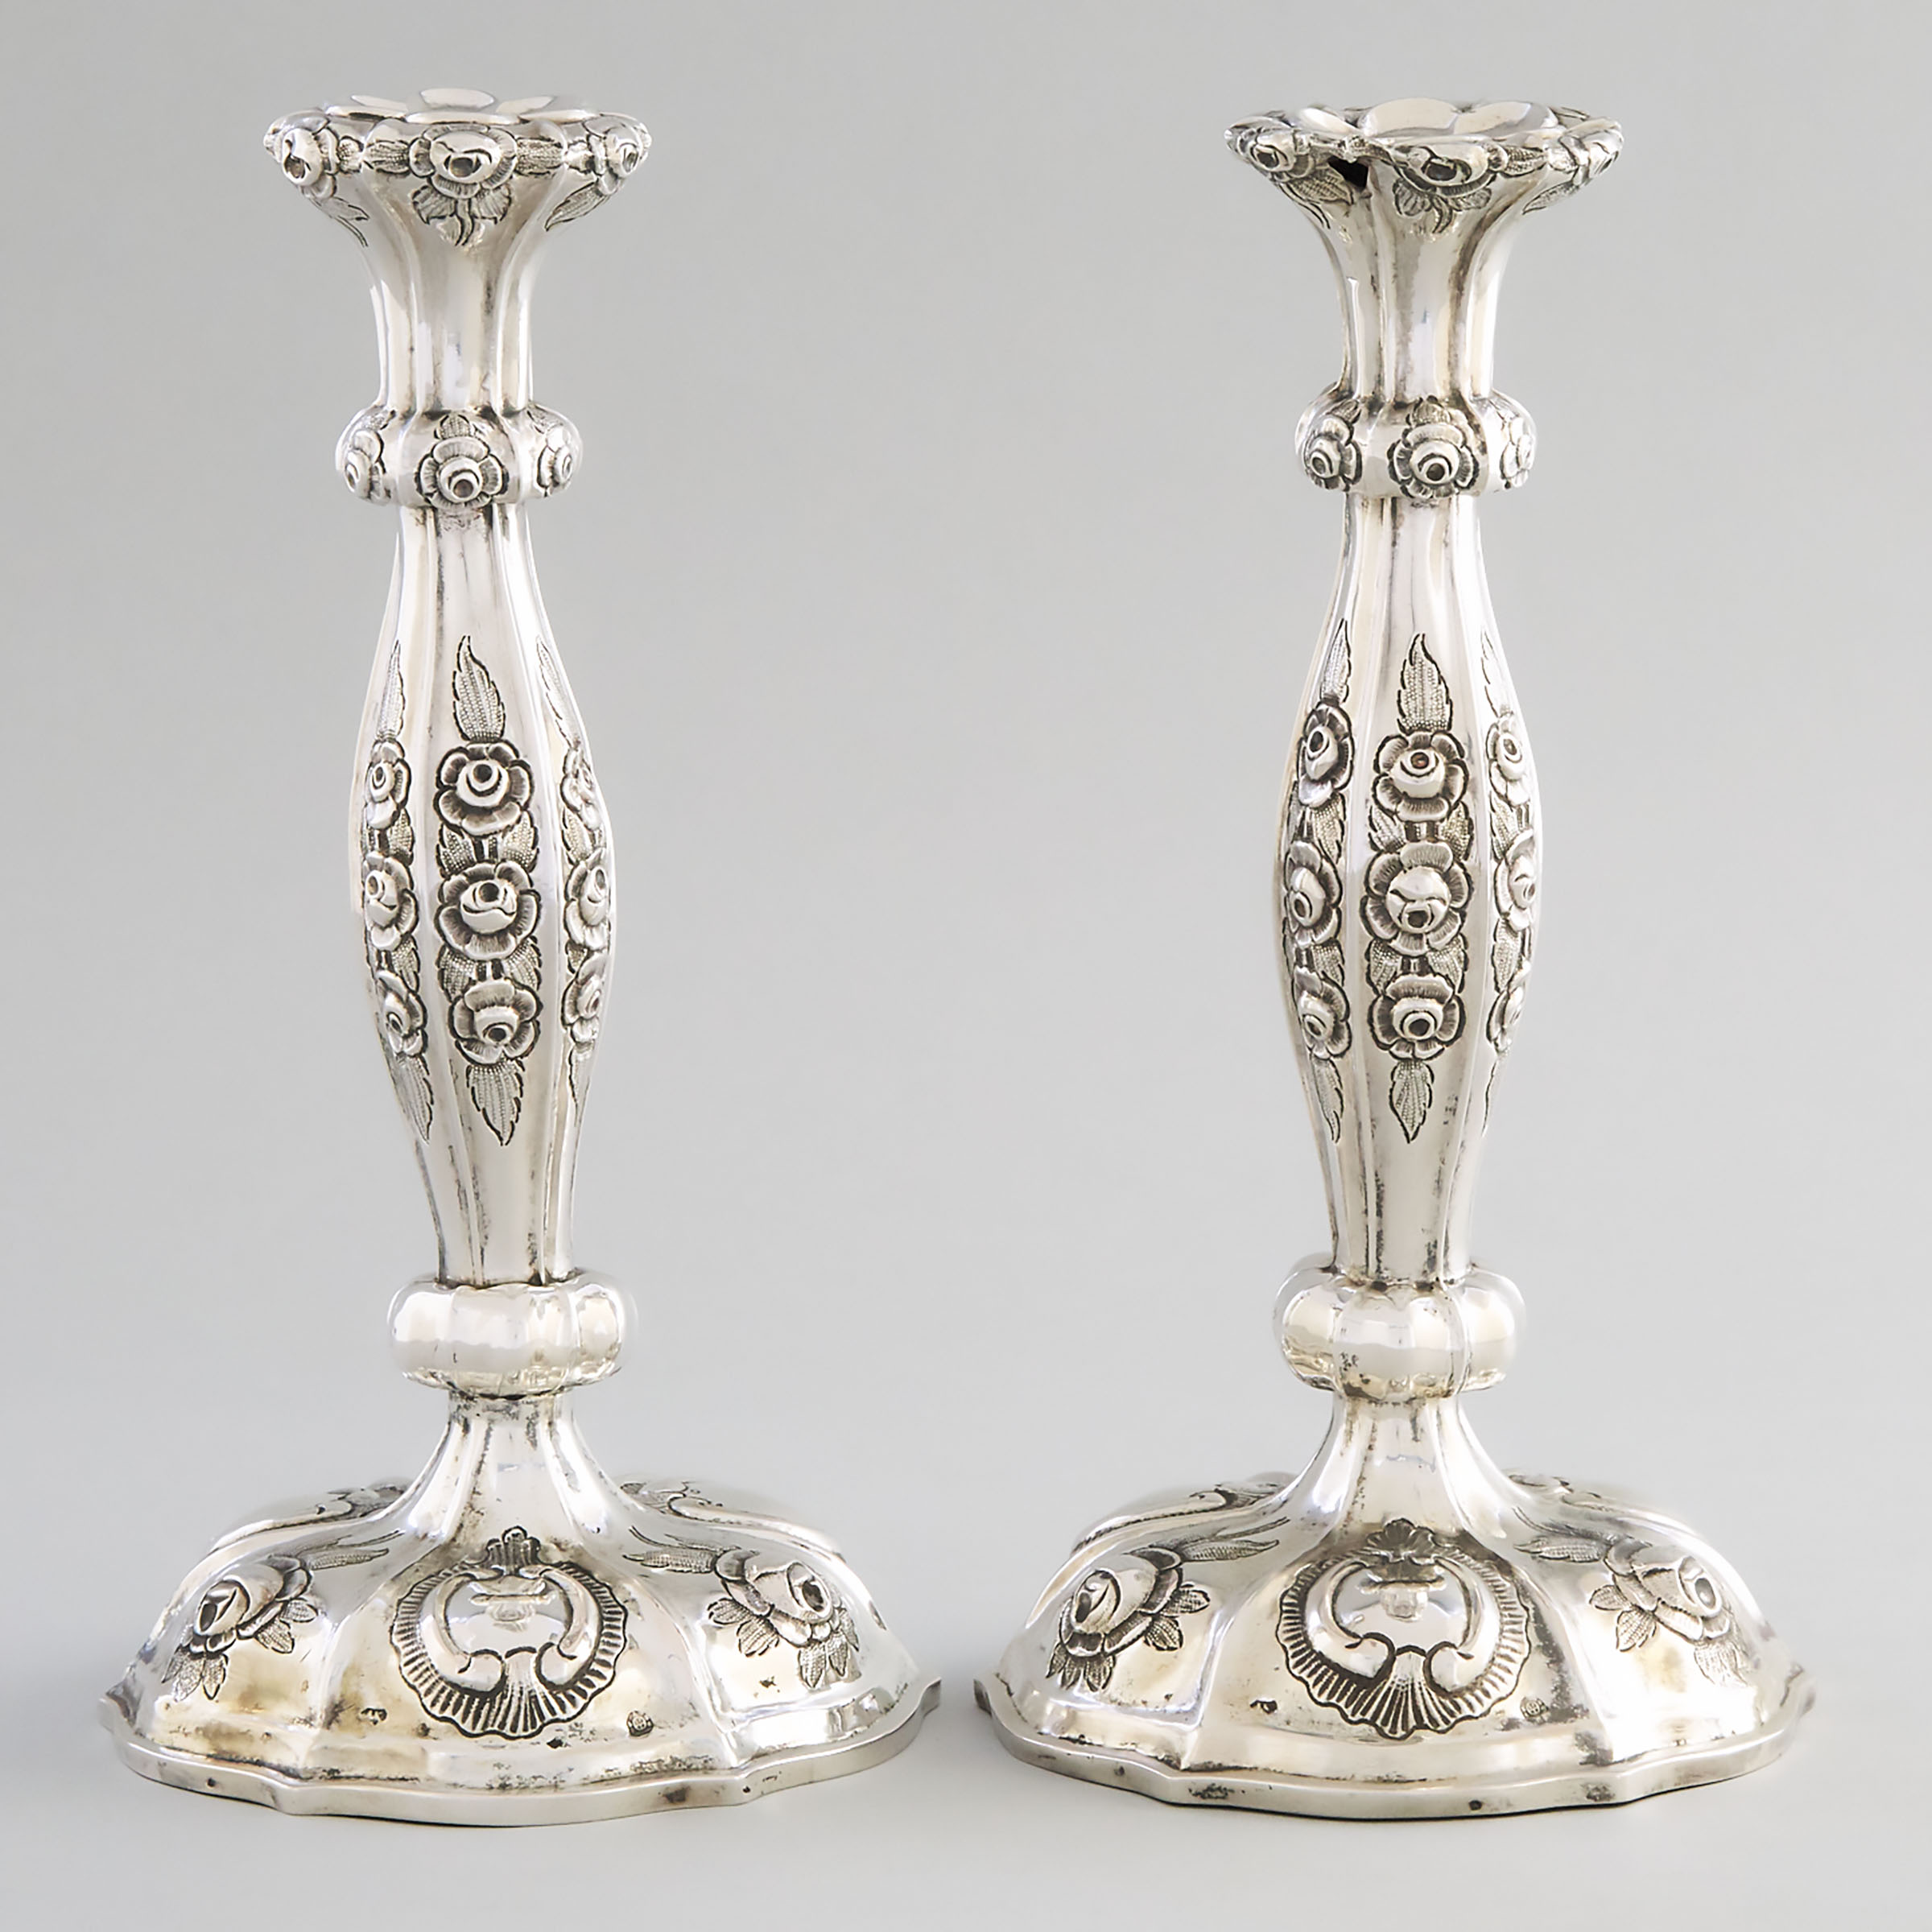 Pair of Austro-Hungarian Silver Table Candlesticks, Vienna, 1860